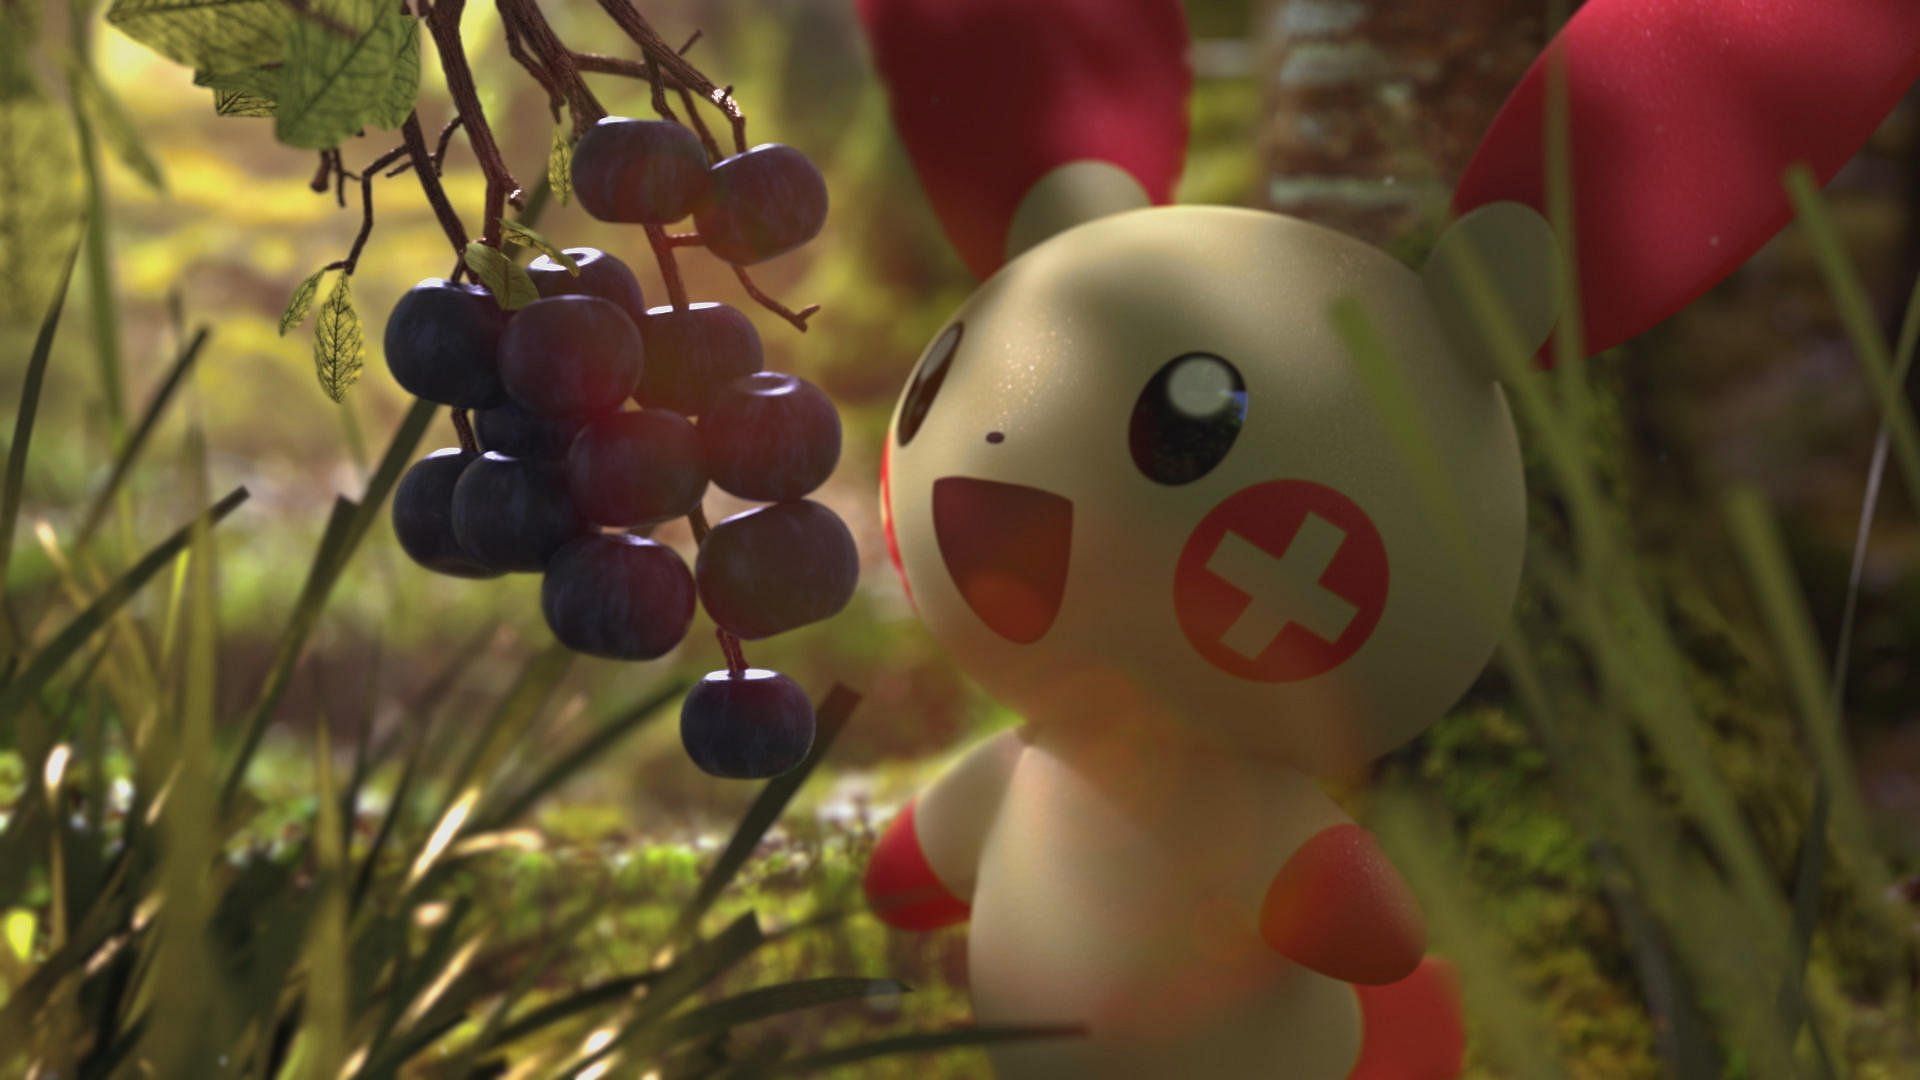 A rendering of Plusle for Pokemon GO (Image via Niantic)